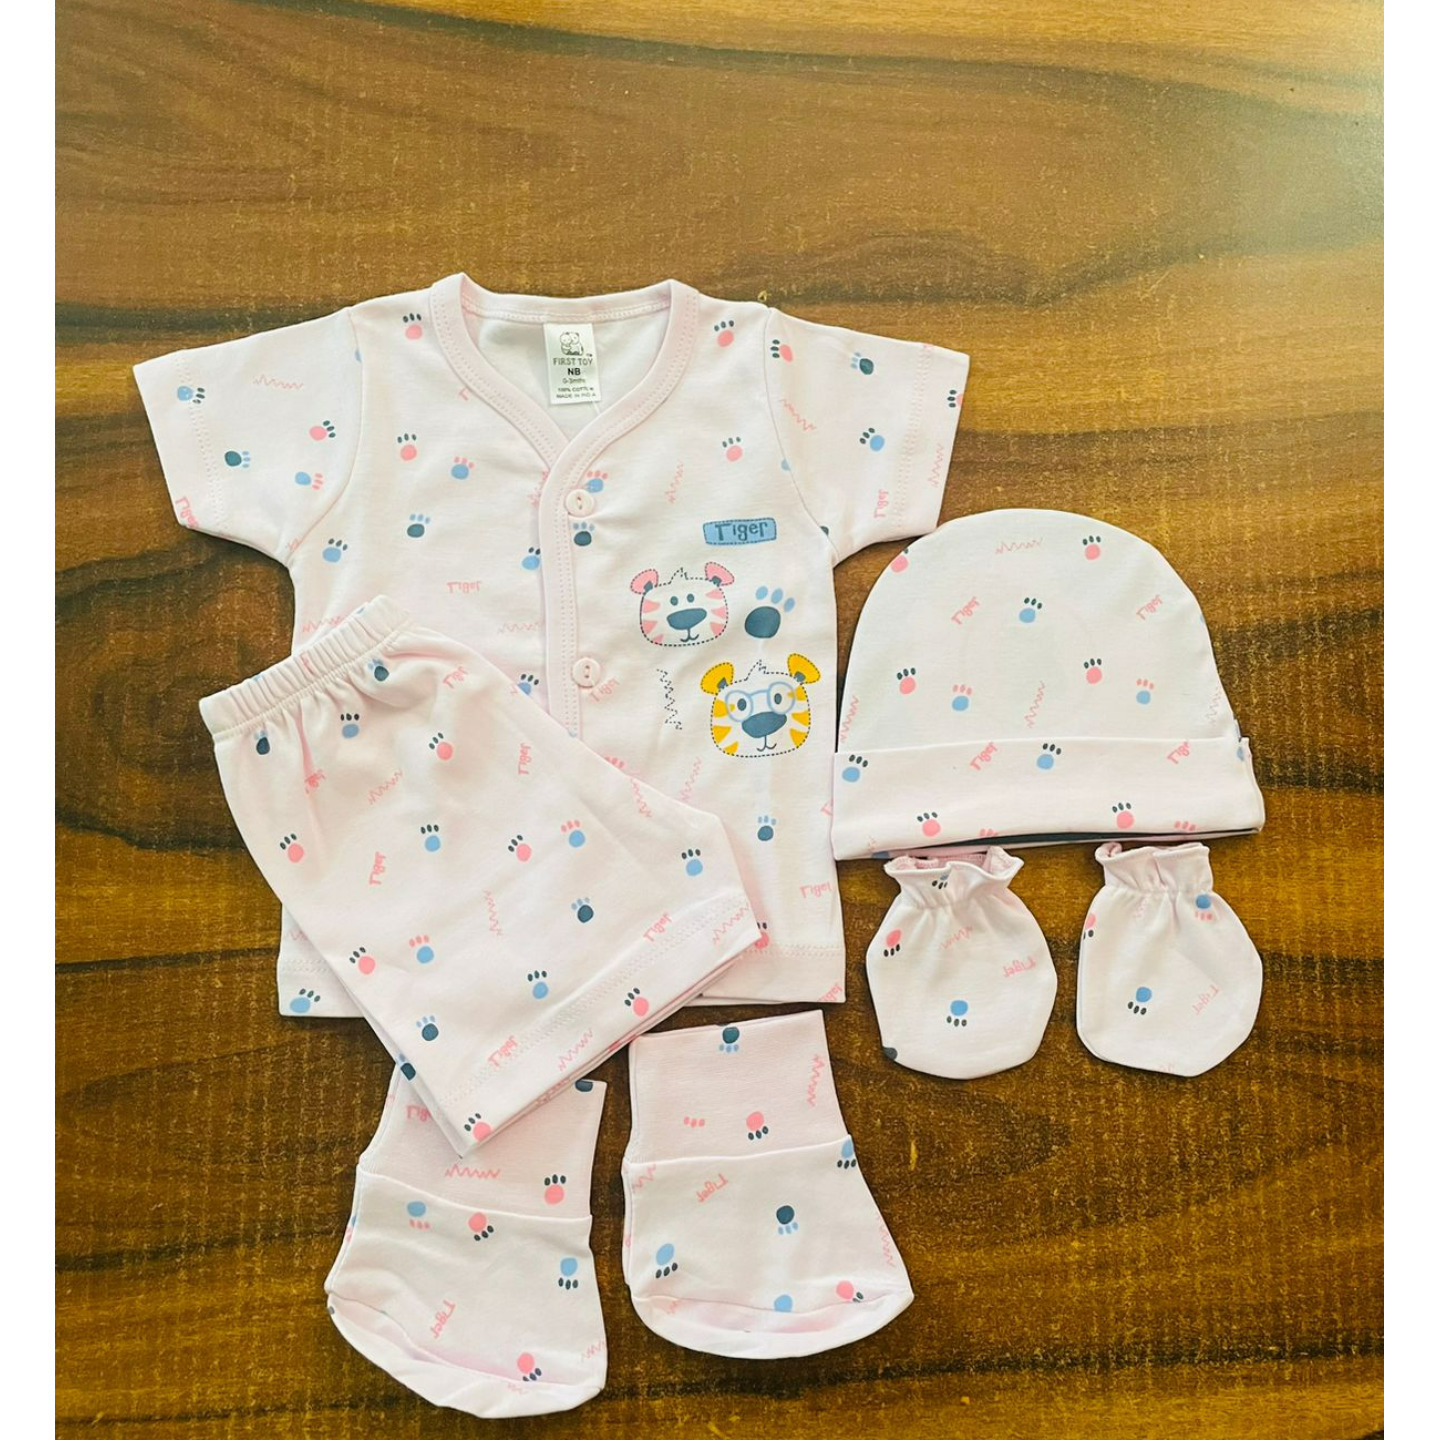 First Toy 5 pcs Gifting Set Peach 3-6 months